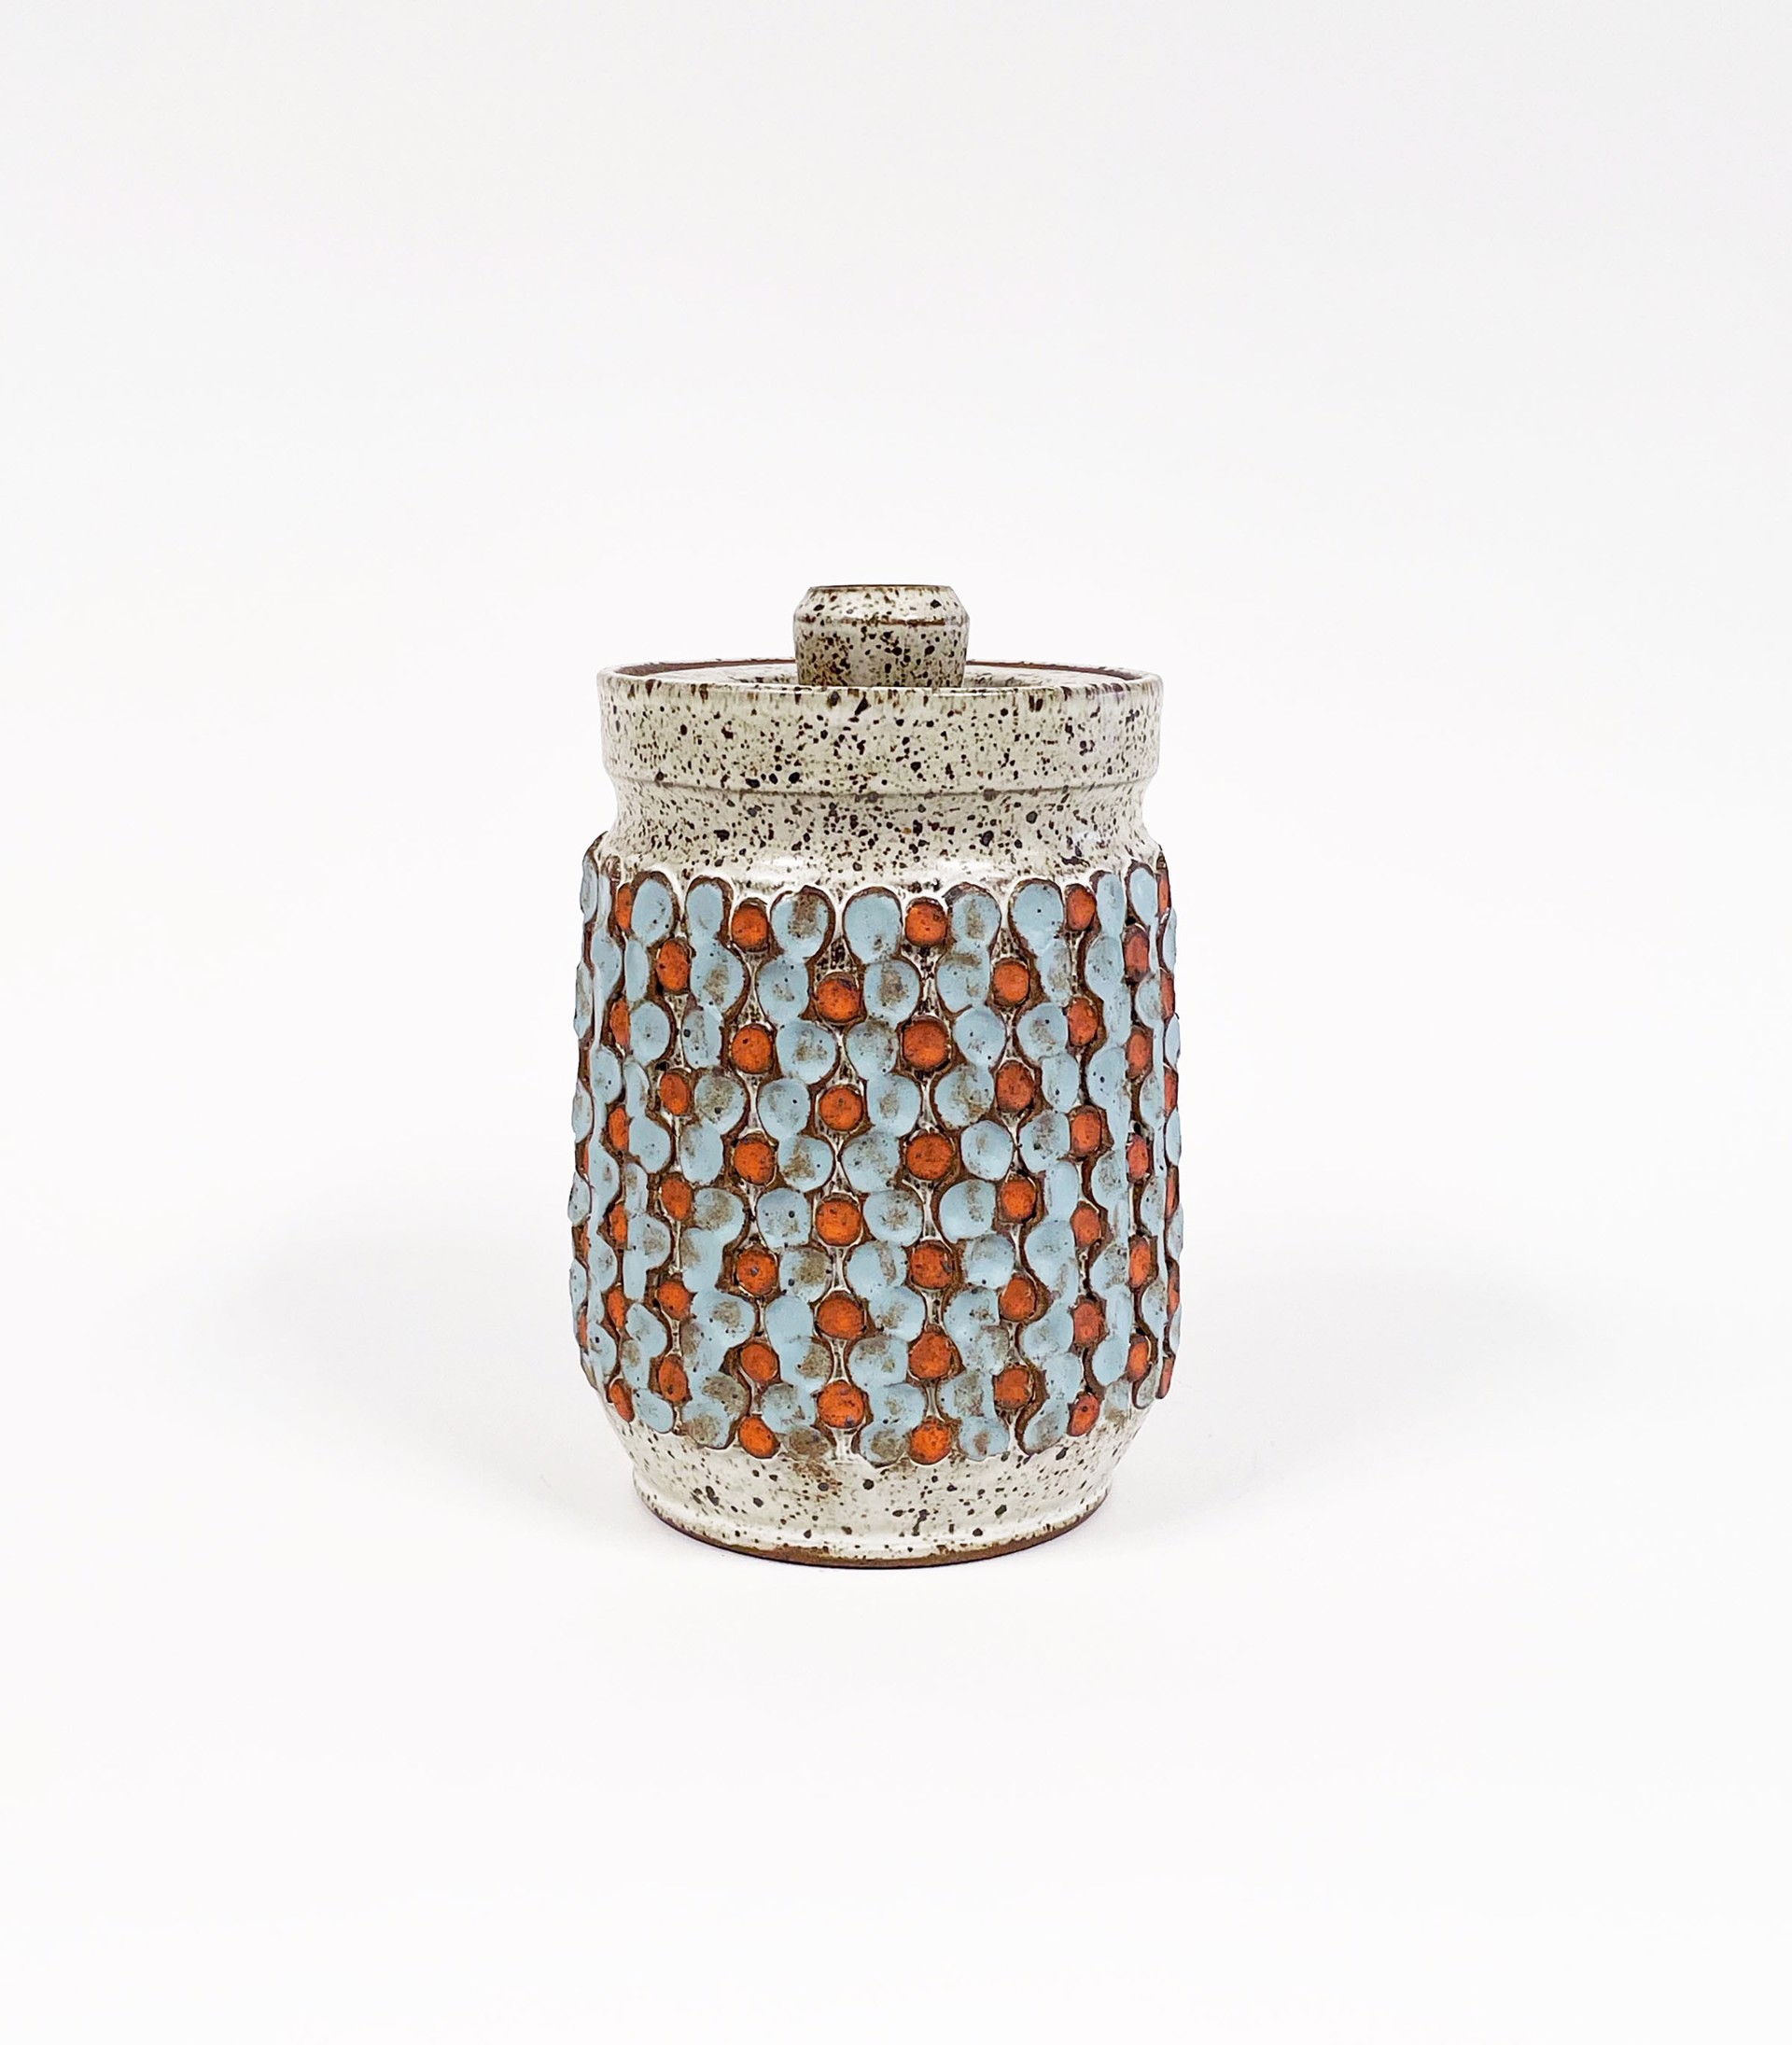 Textured Lidded Vessel 2 by Kat and Roger